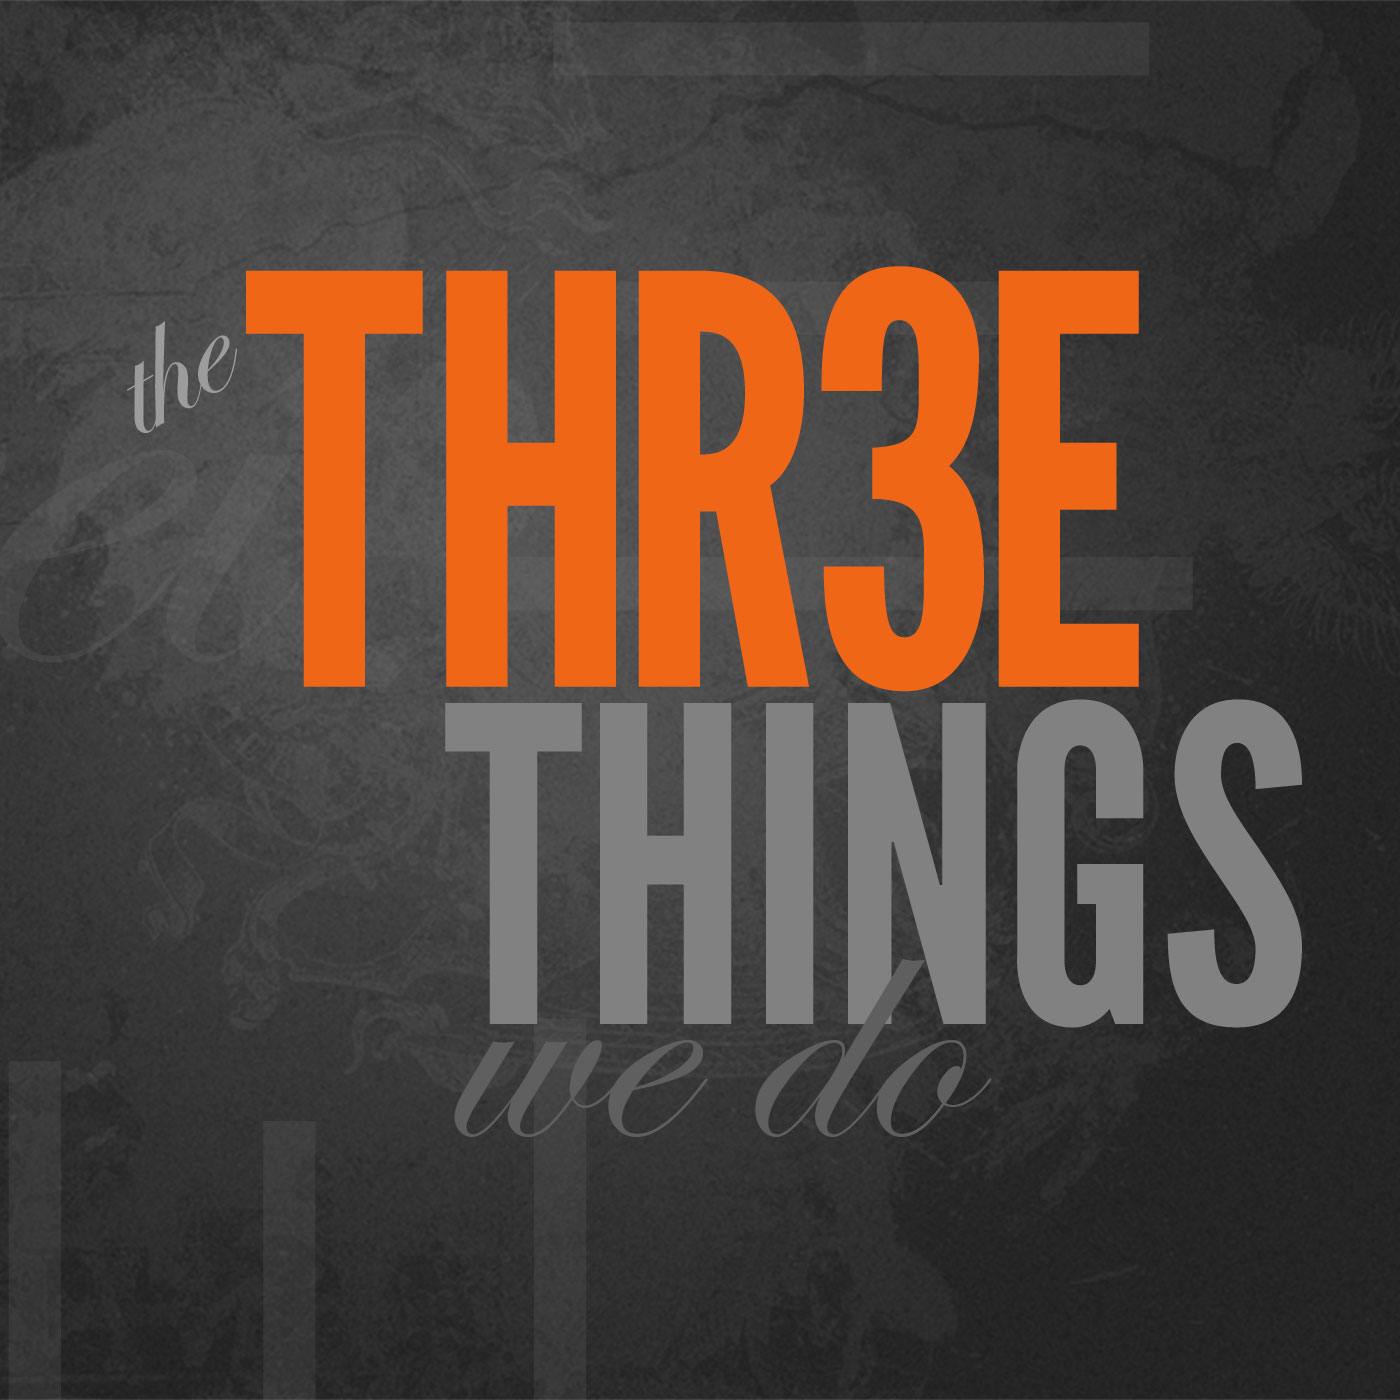 The Three Things We Do